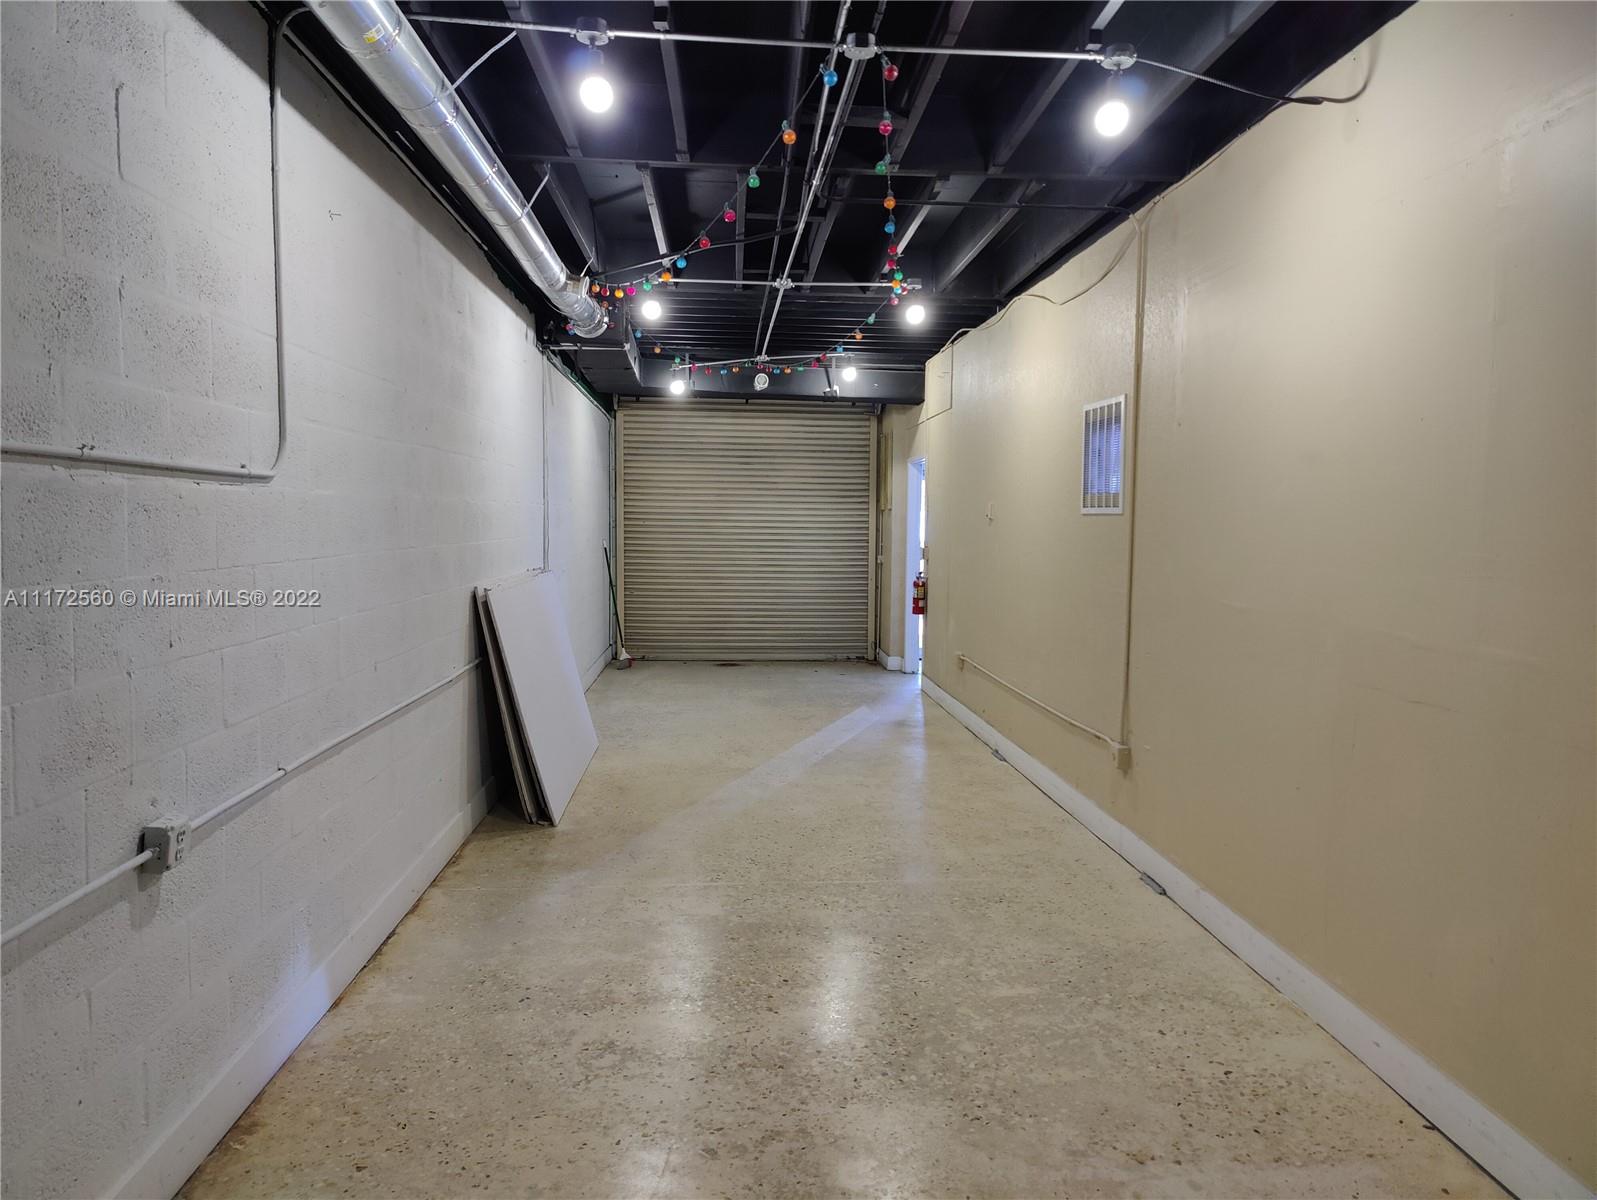 Warehouse corner unit. 6 offices, 2 bathrooms, reception. dinning area, plus Warehouse area with A/C. 2 Stories with 1 bath on each floor. 1 assigned parking space plus guest parking available. Unit square footage is close to 3,000 sft including second floor build out.